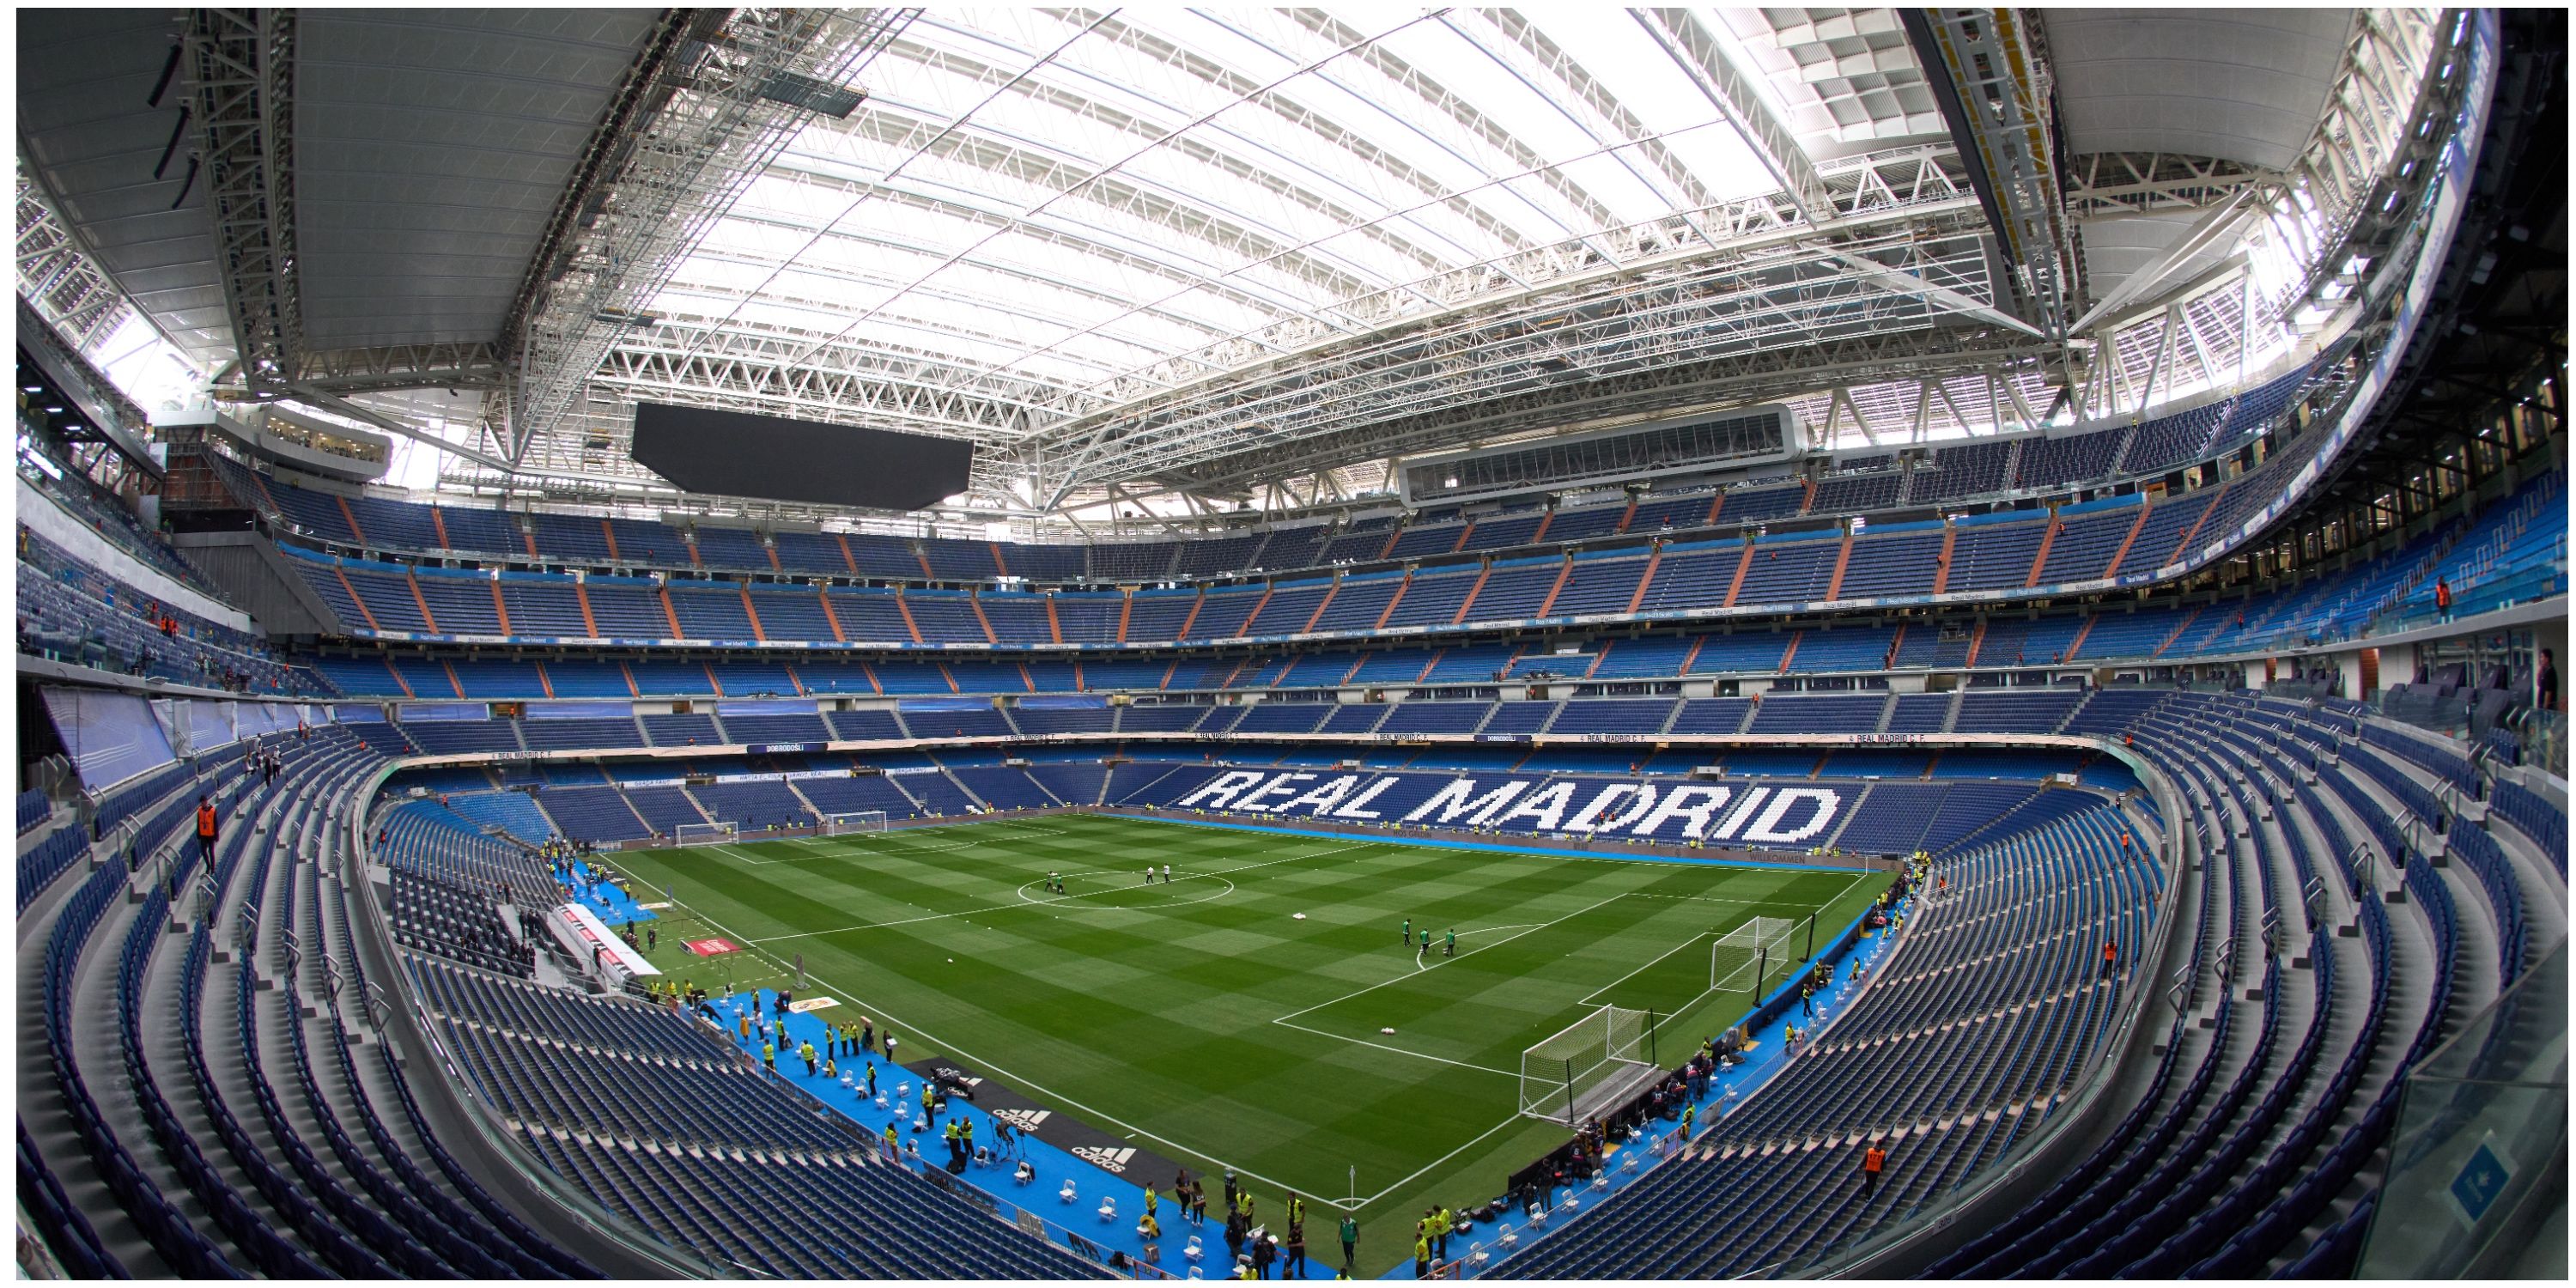 Football’s 20 best stadiums ranked ft. new Bernabeu, Old Trafford, Anfield and Camp Nou